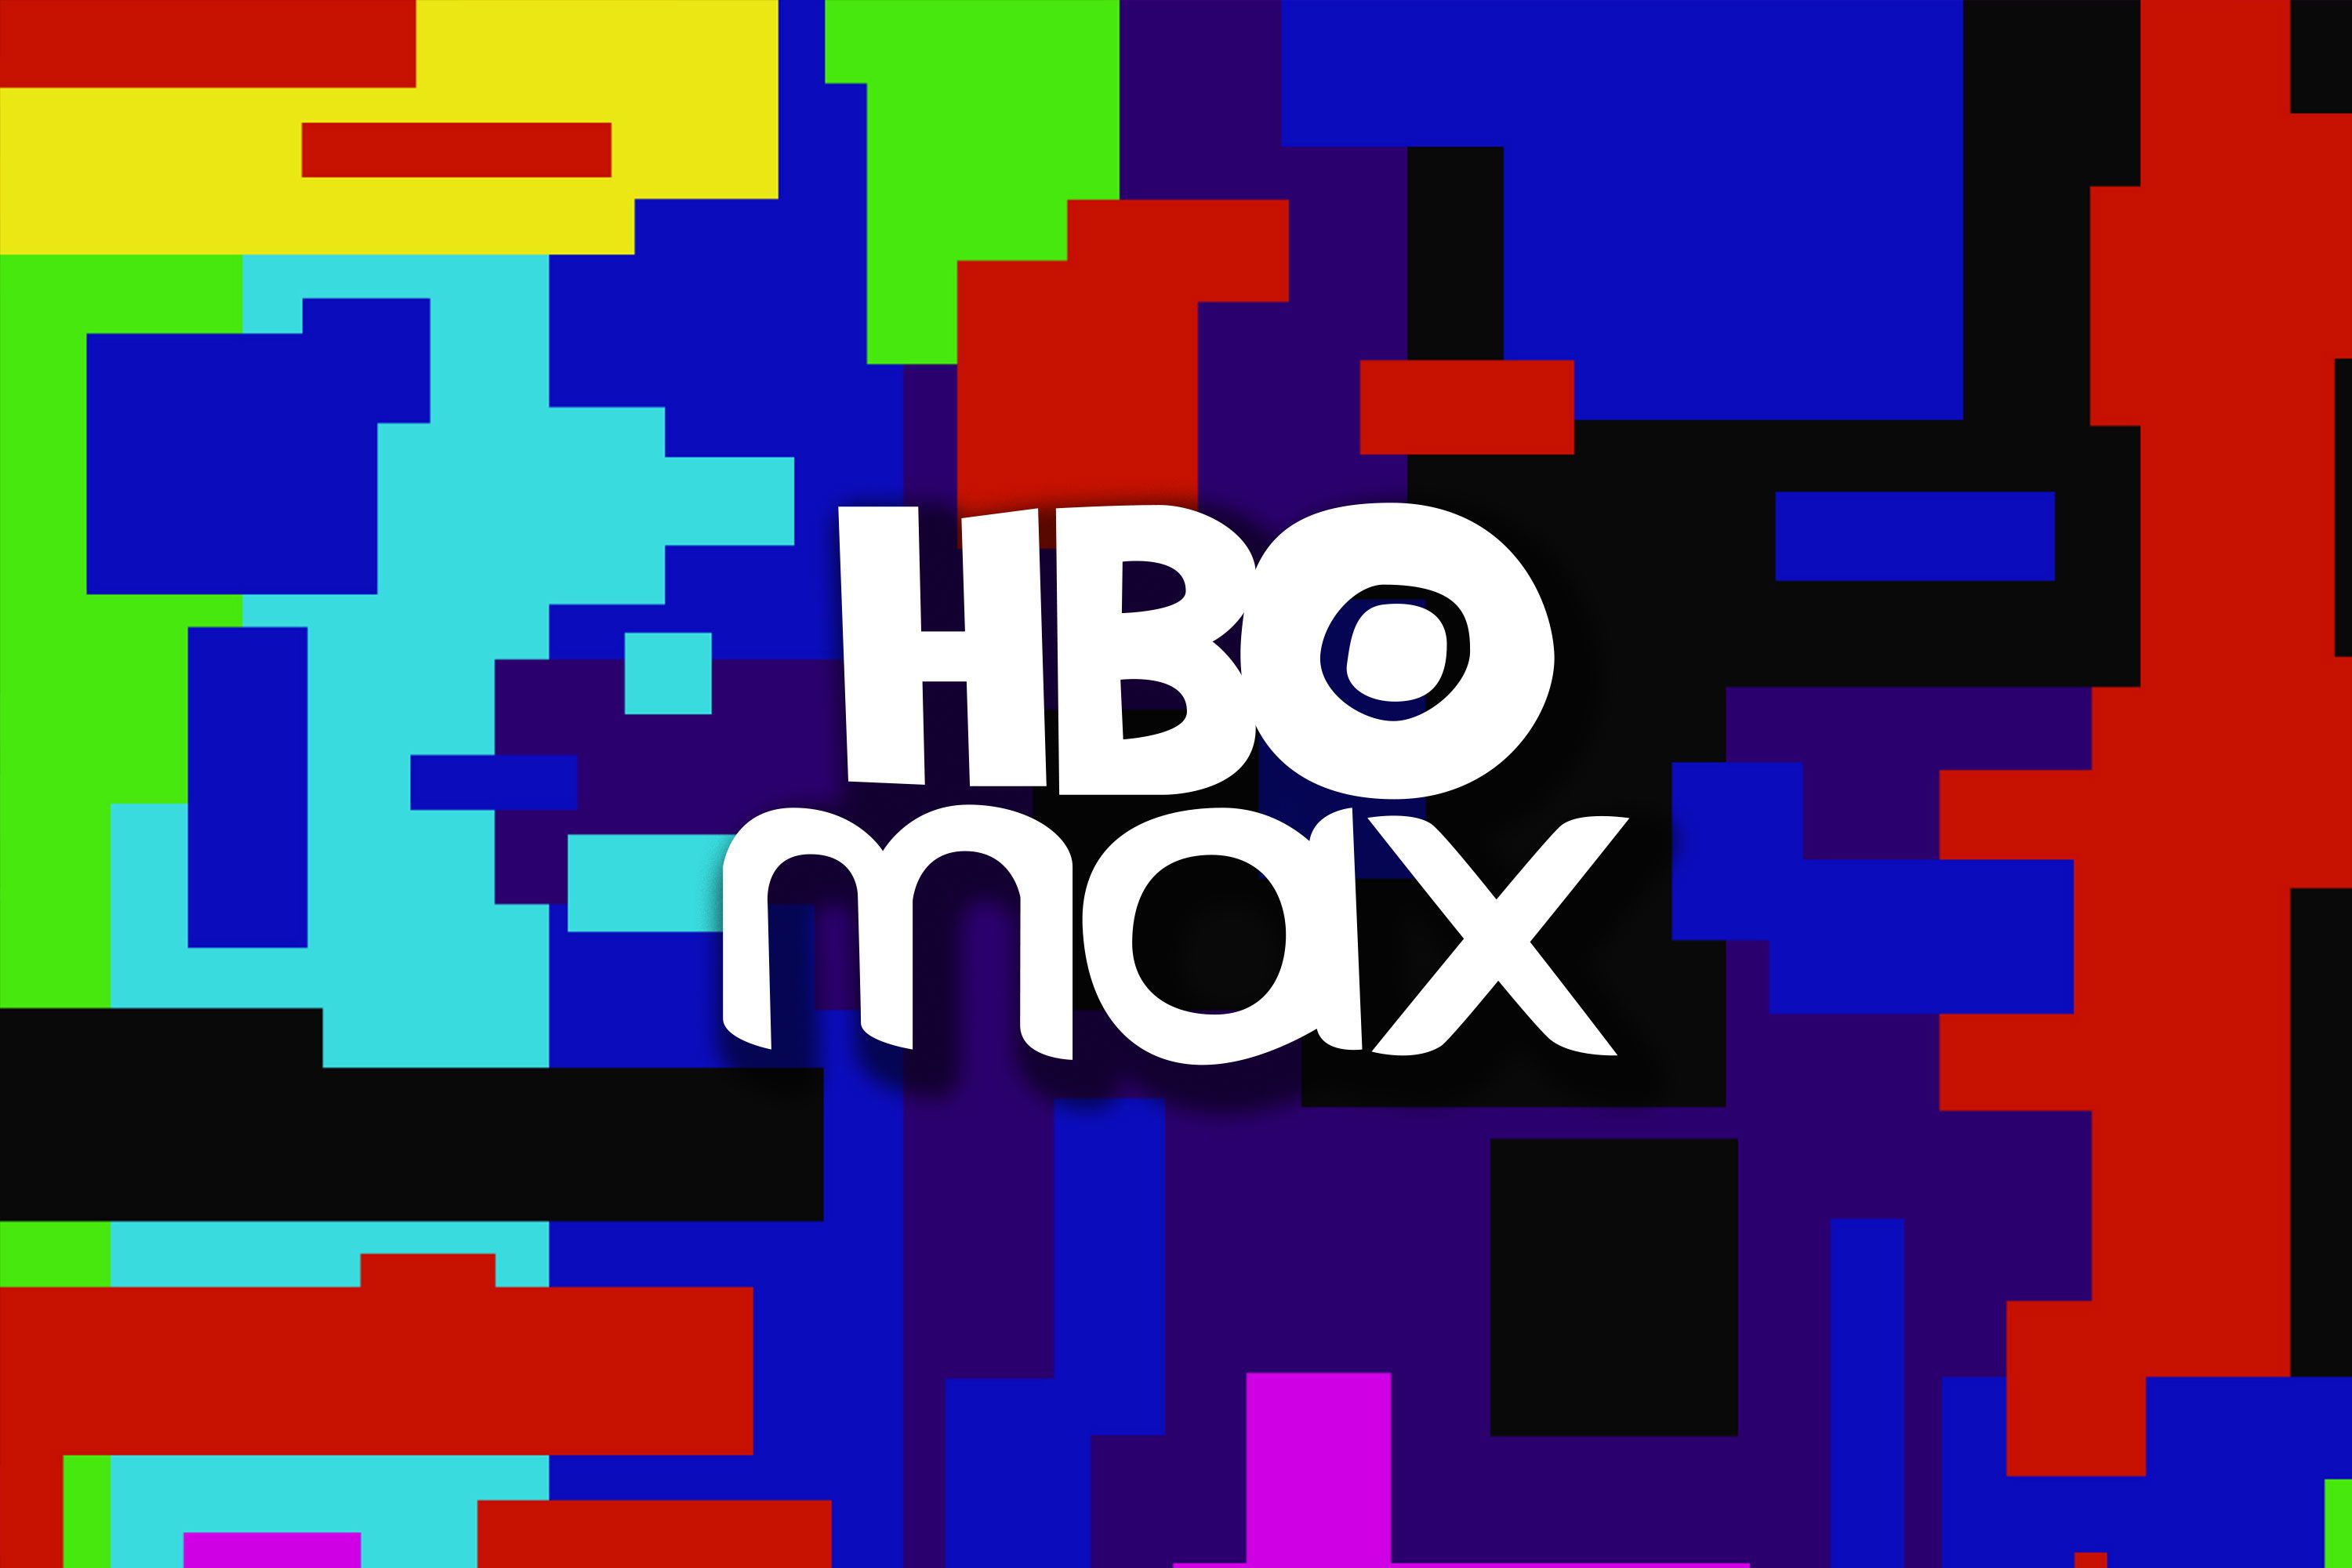 HBO Max: price, films, and how to get a free trial